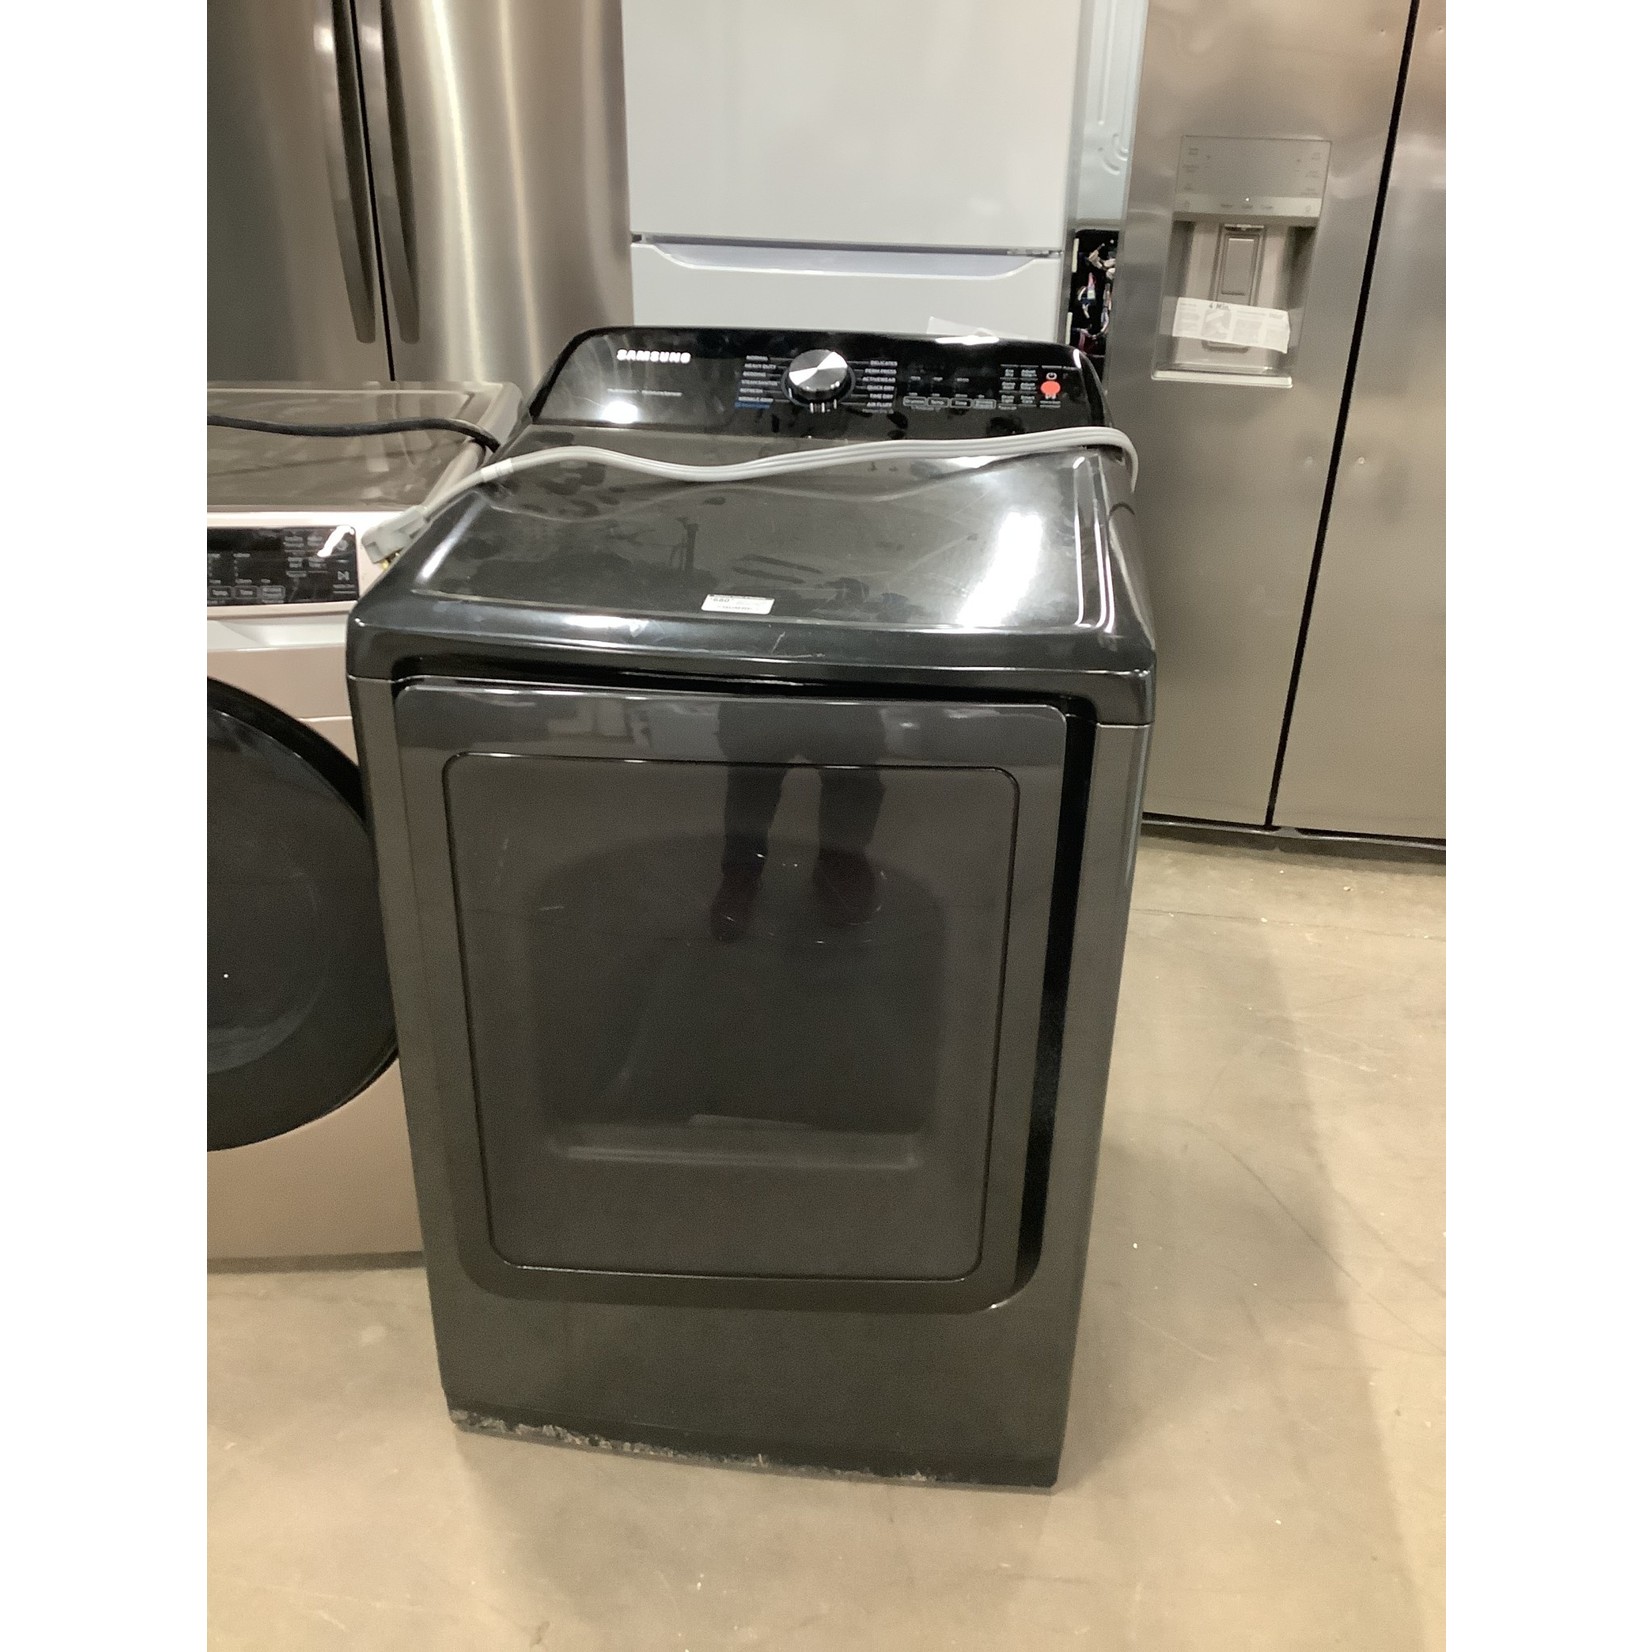 Samsung 7.4 CU.FT. ELECTRIC DRYER WITH STEAM SANITIZE IN BLACK STAINLESS STEEL